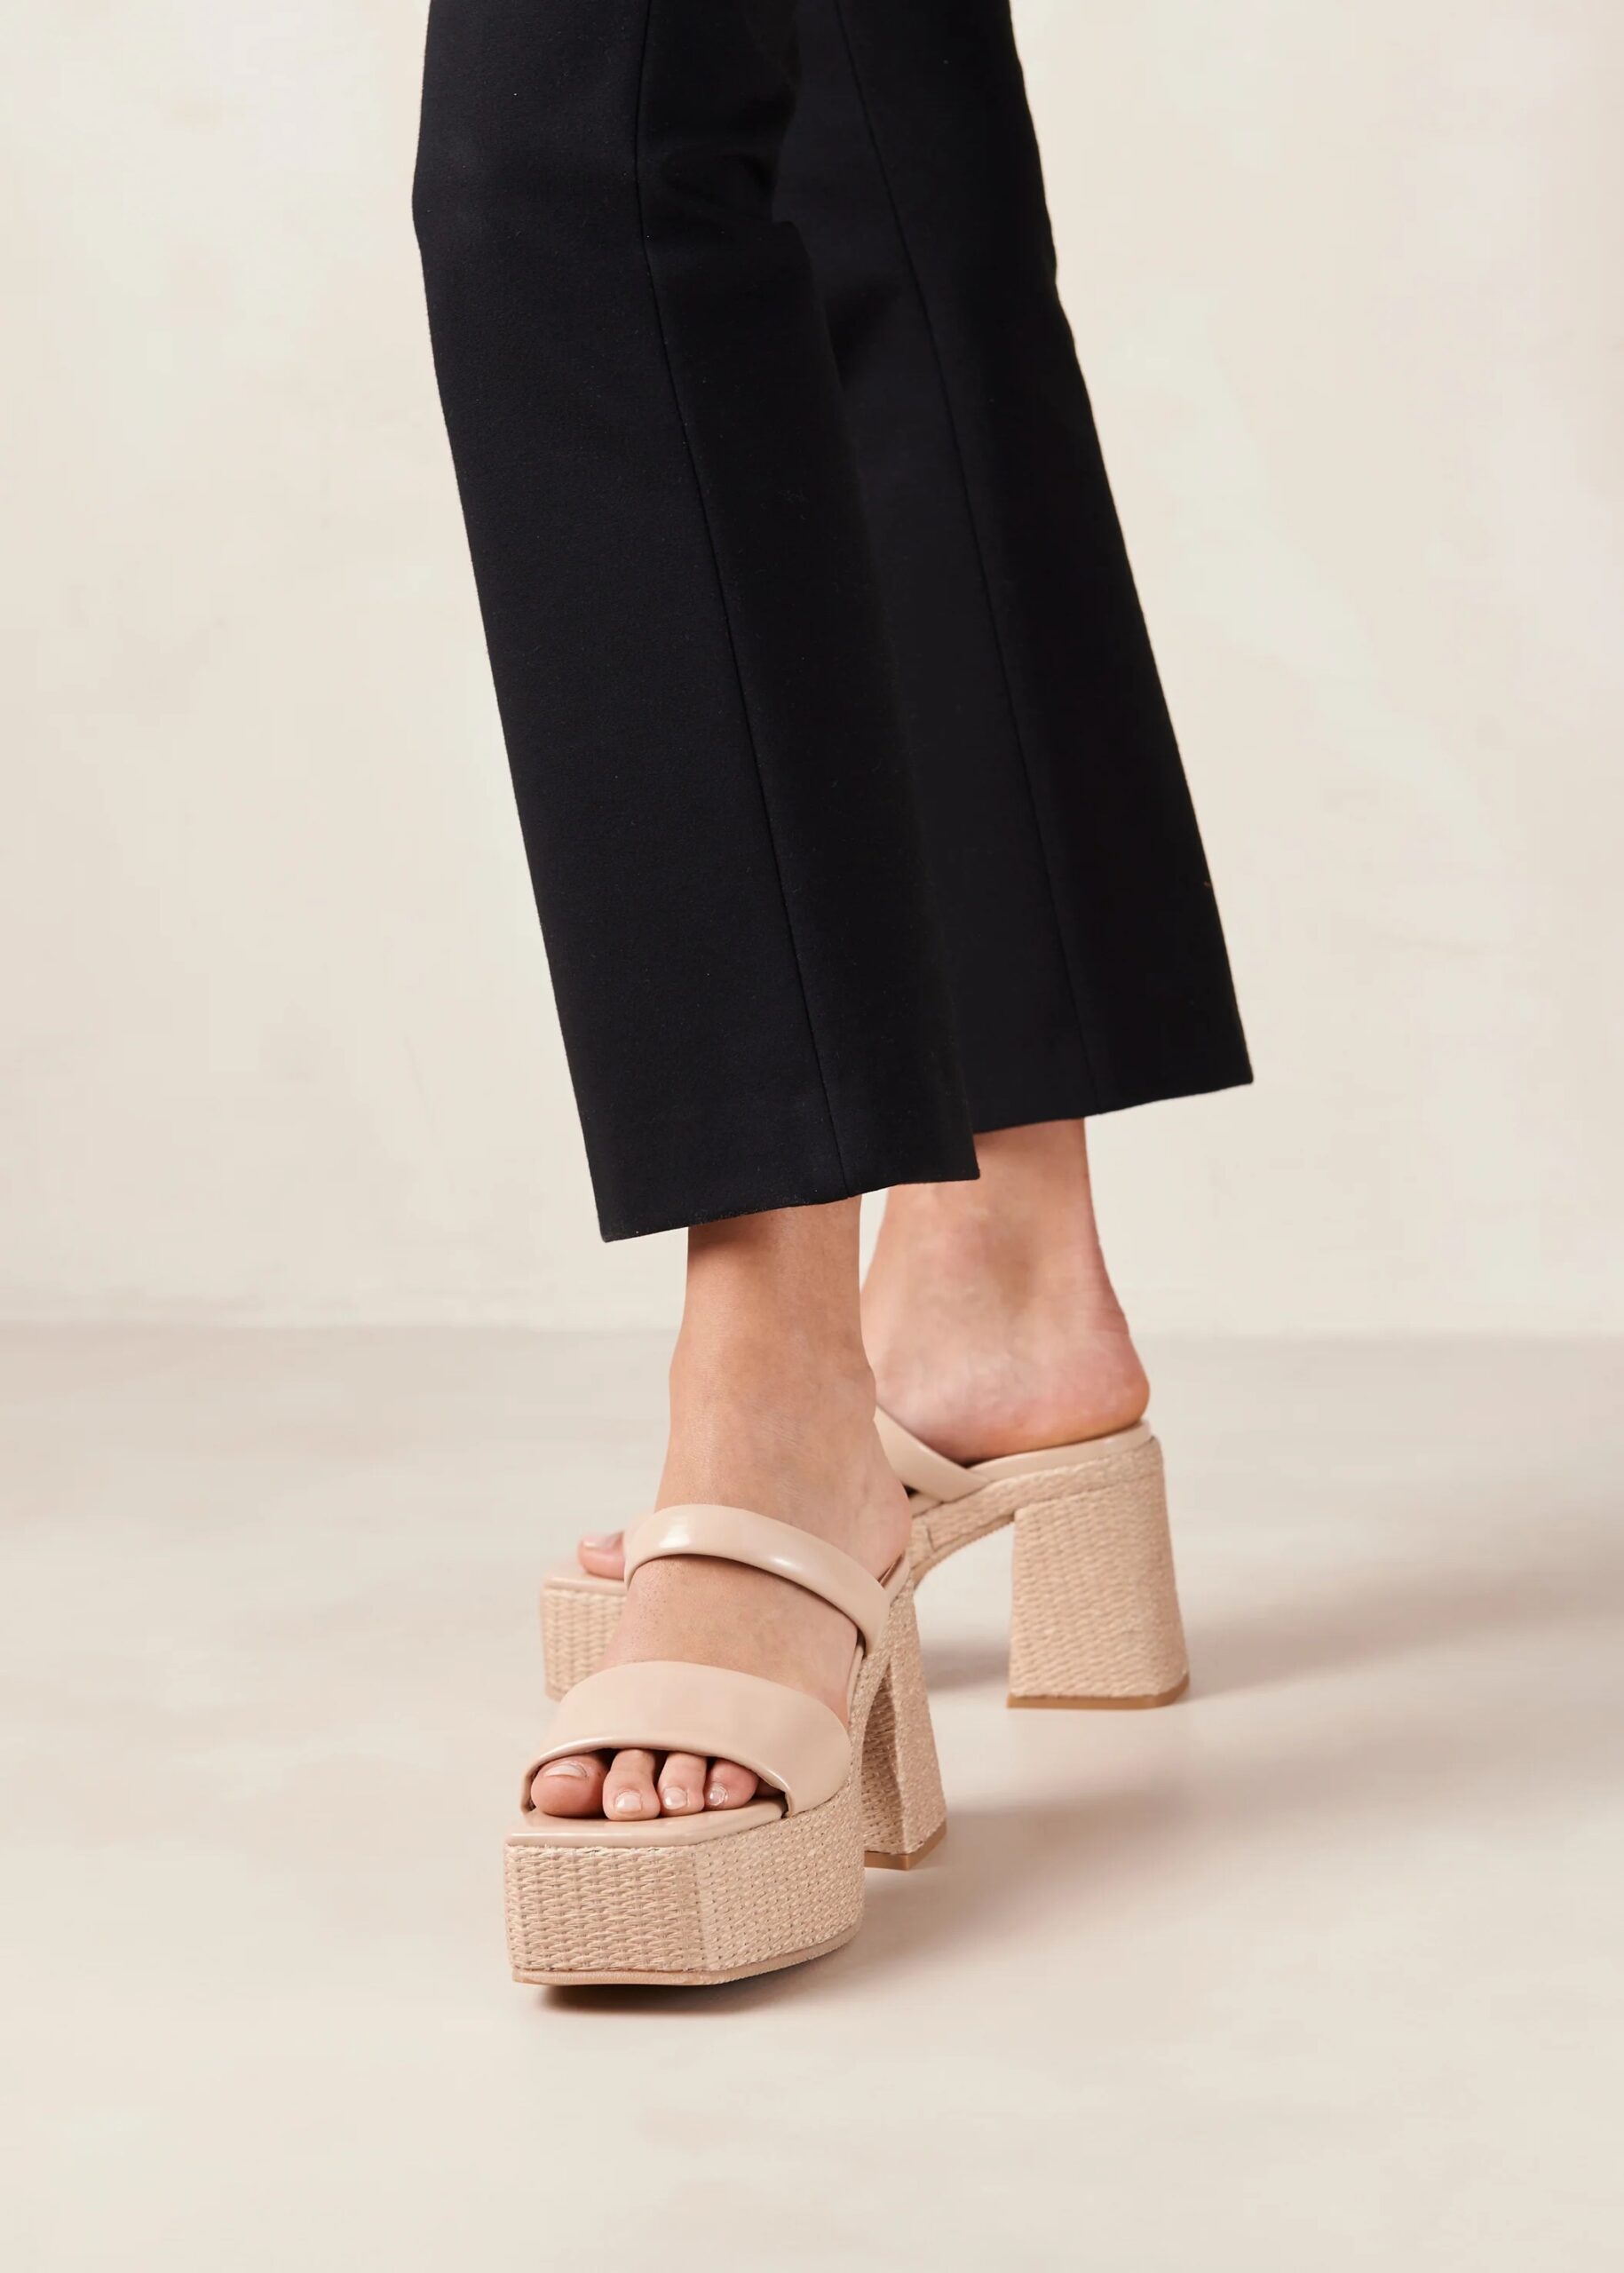 Alohas vegan leather platform sandals on a pair of feet in a studio shoot.